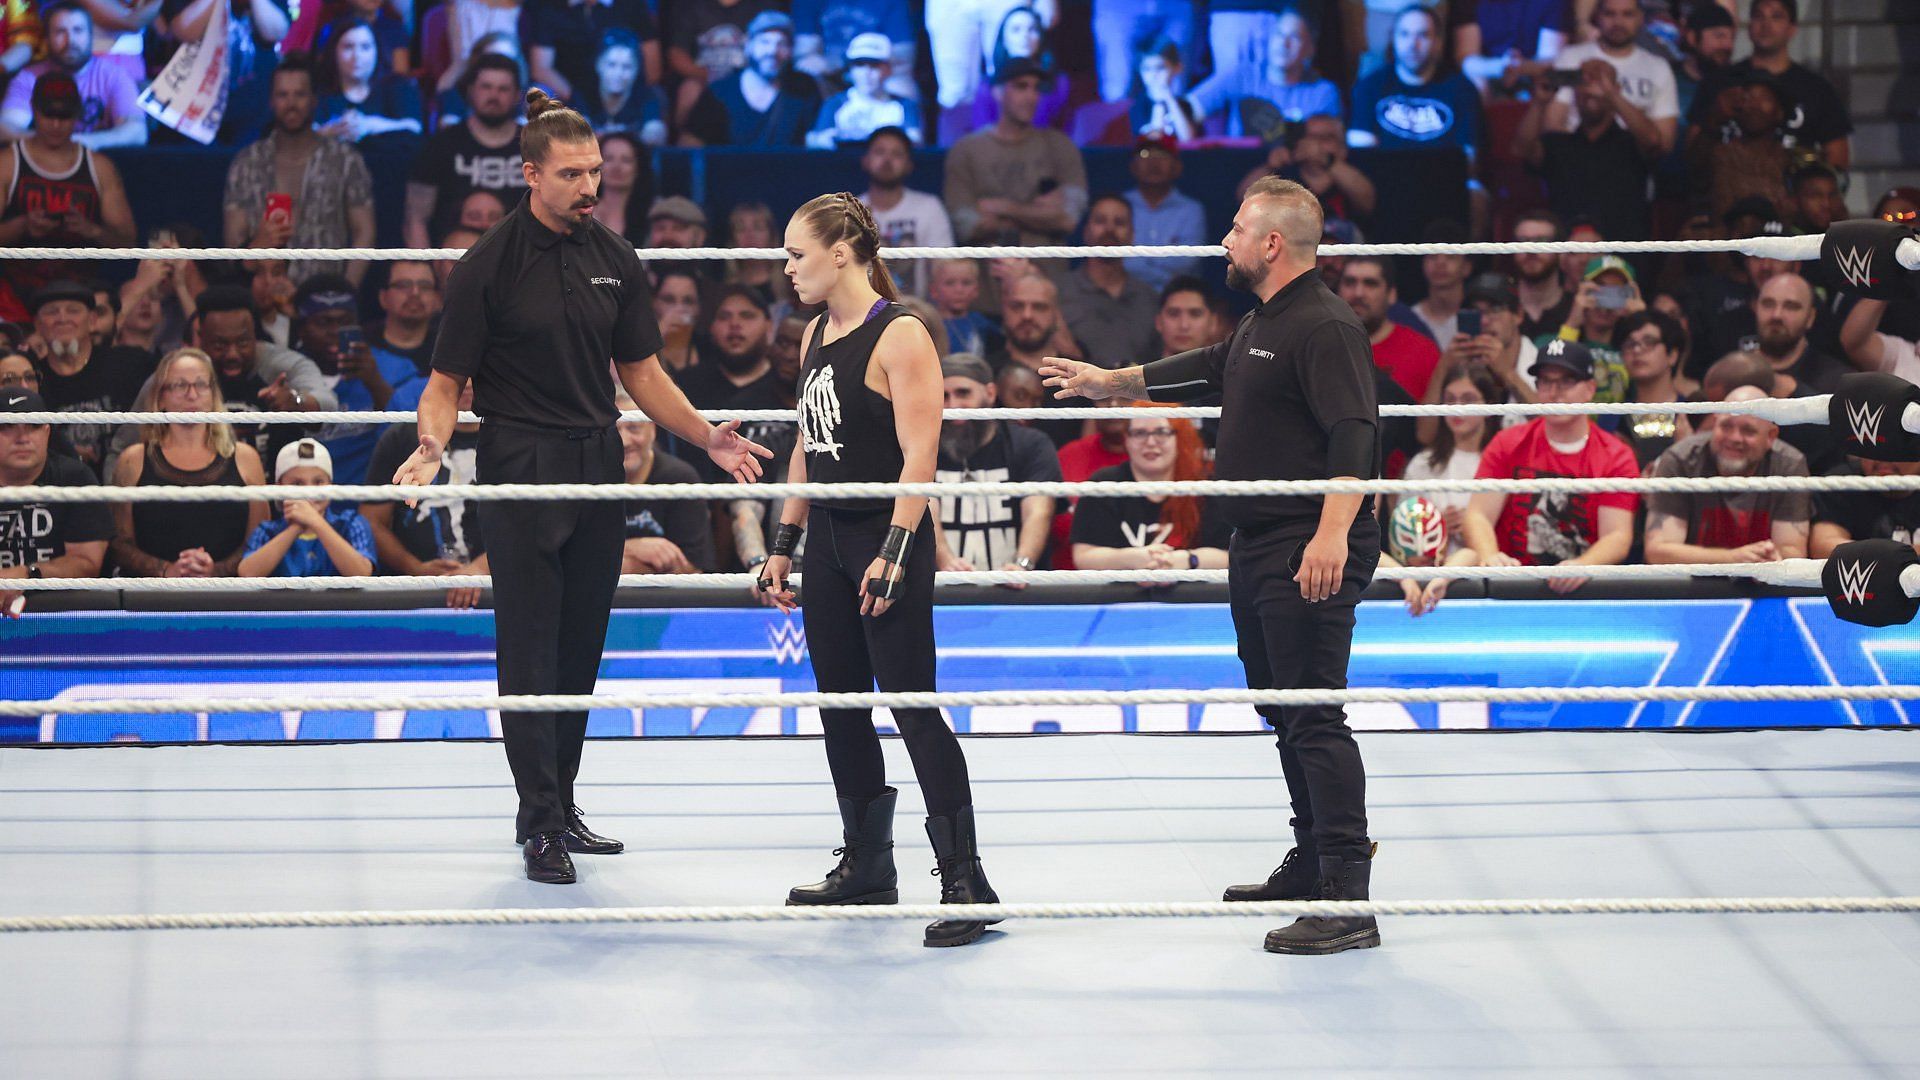 Ronda Rousey confronts security deployed by Adam Pearce